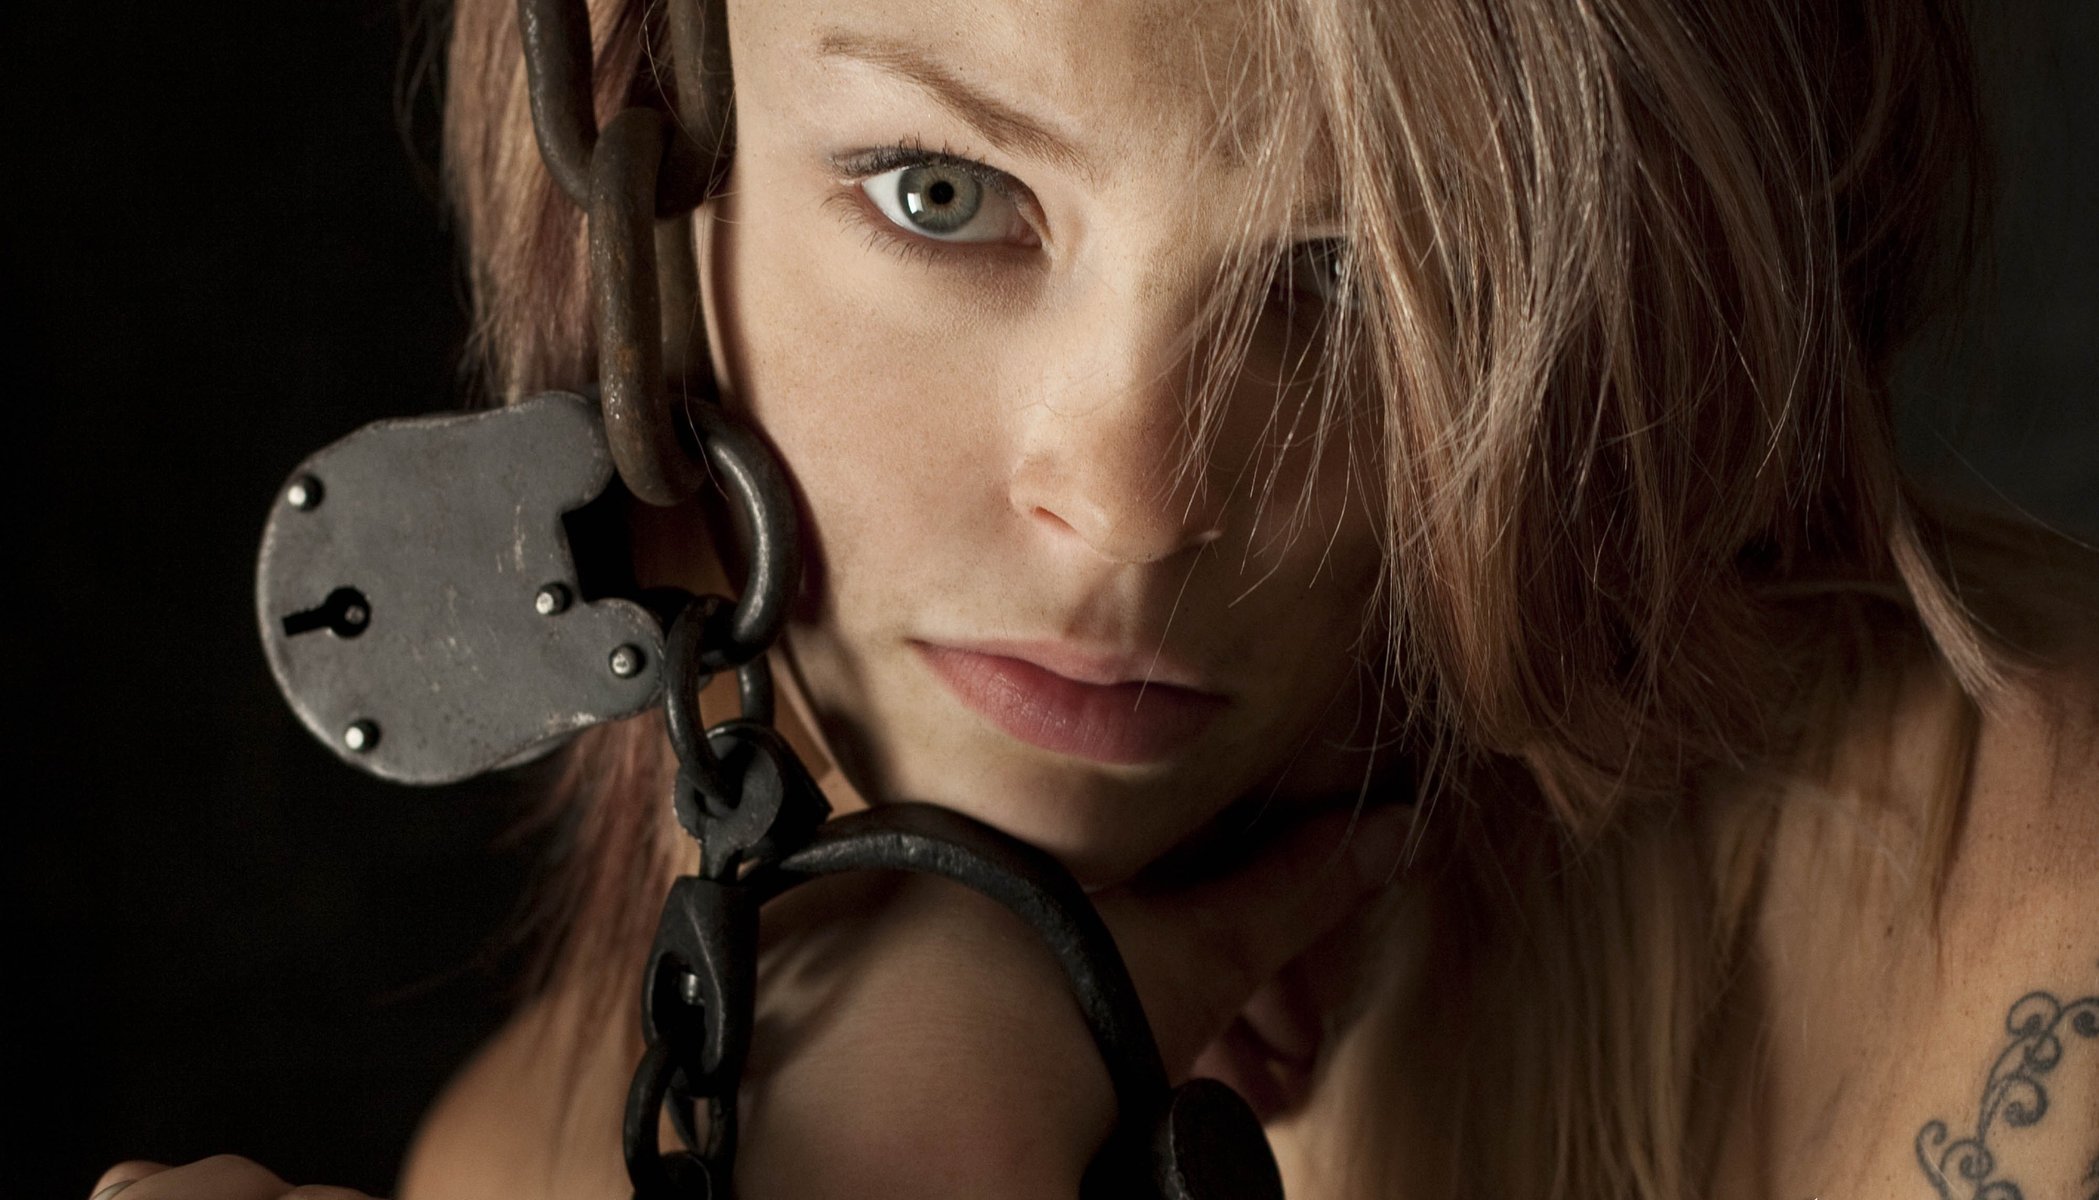 Macro photo of a girl in chains on a lock with a tattoo